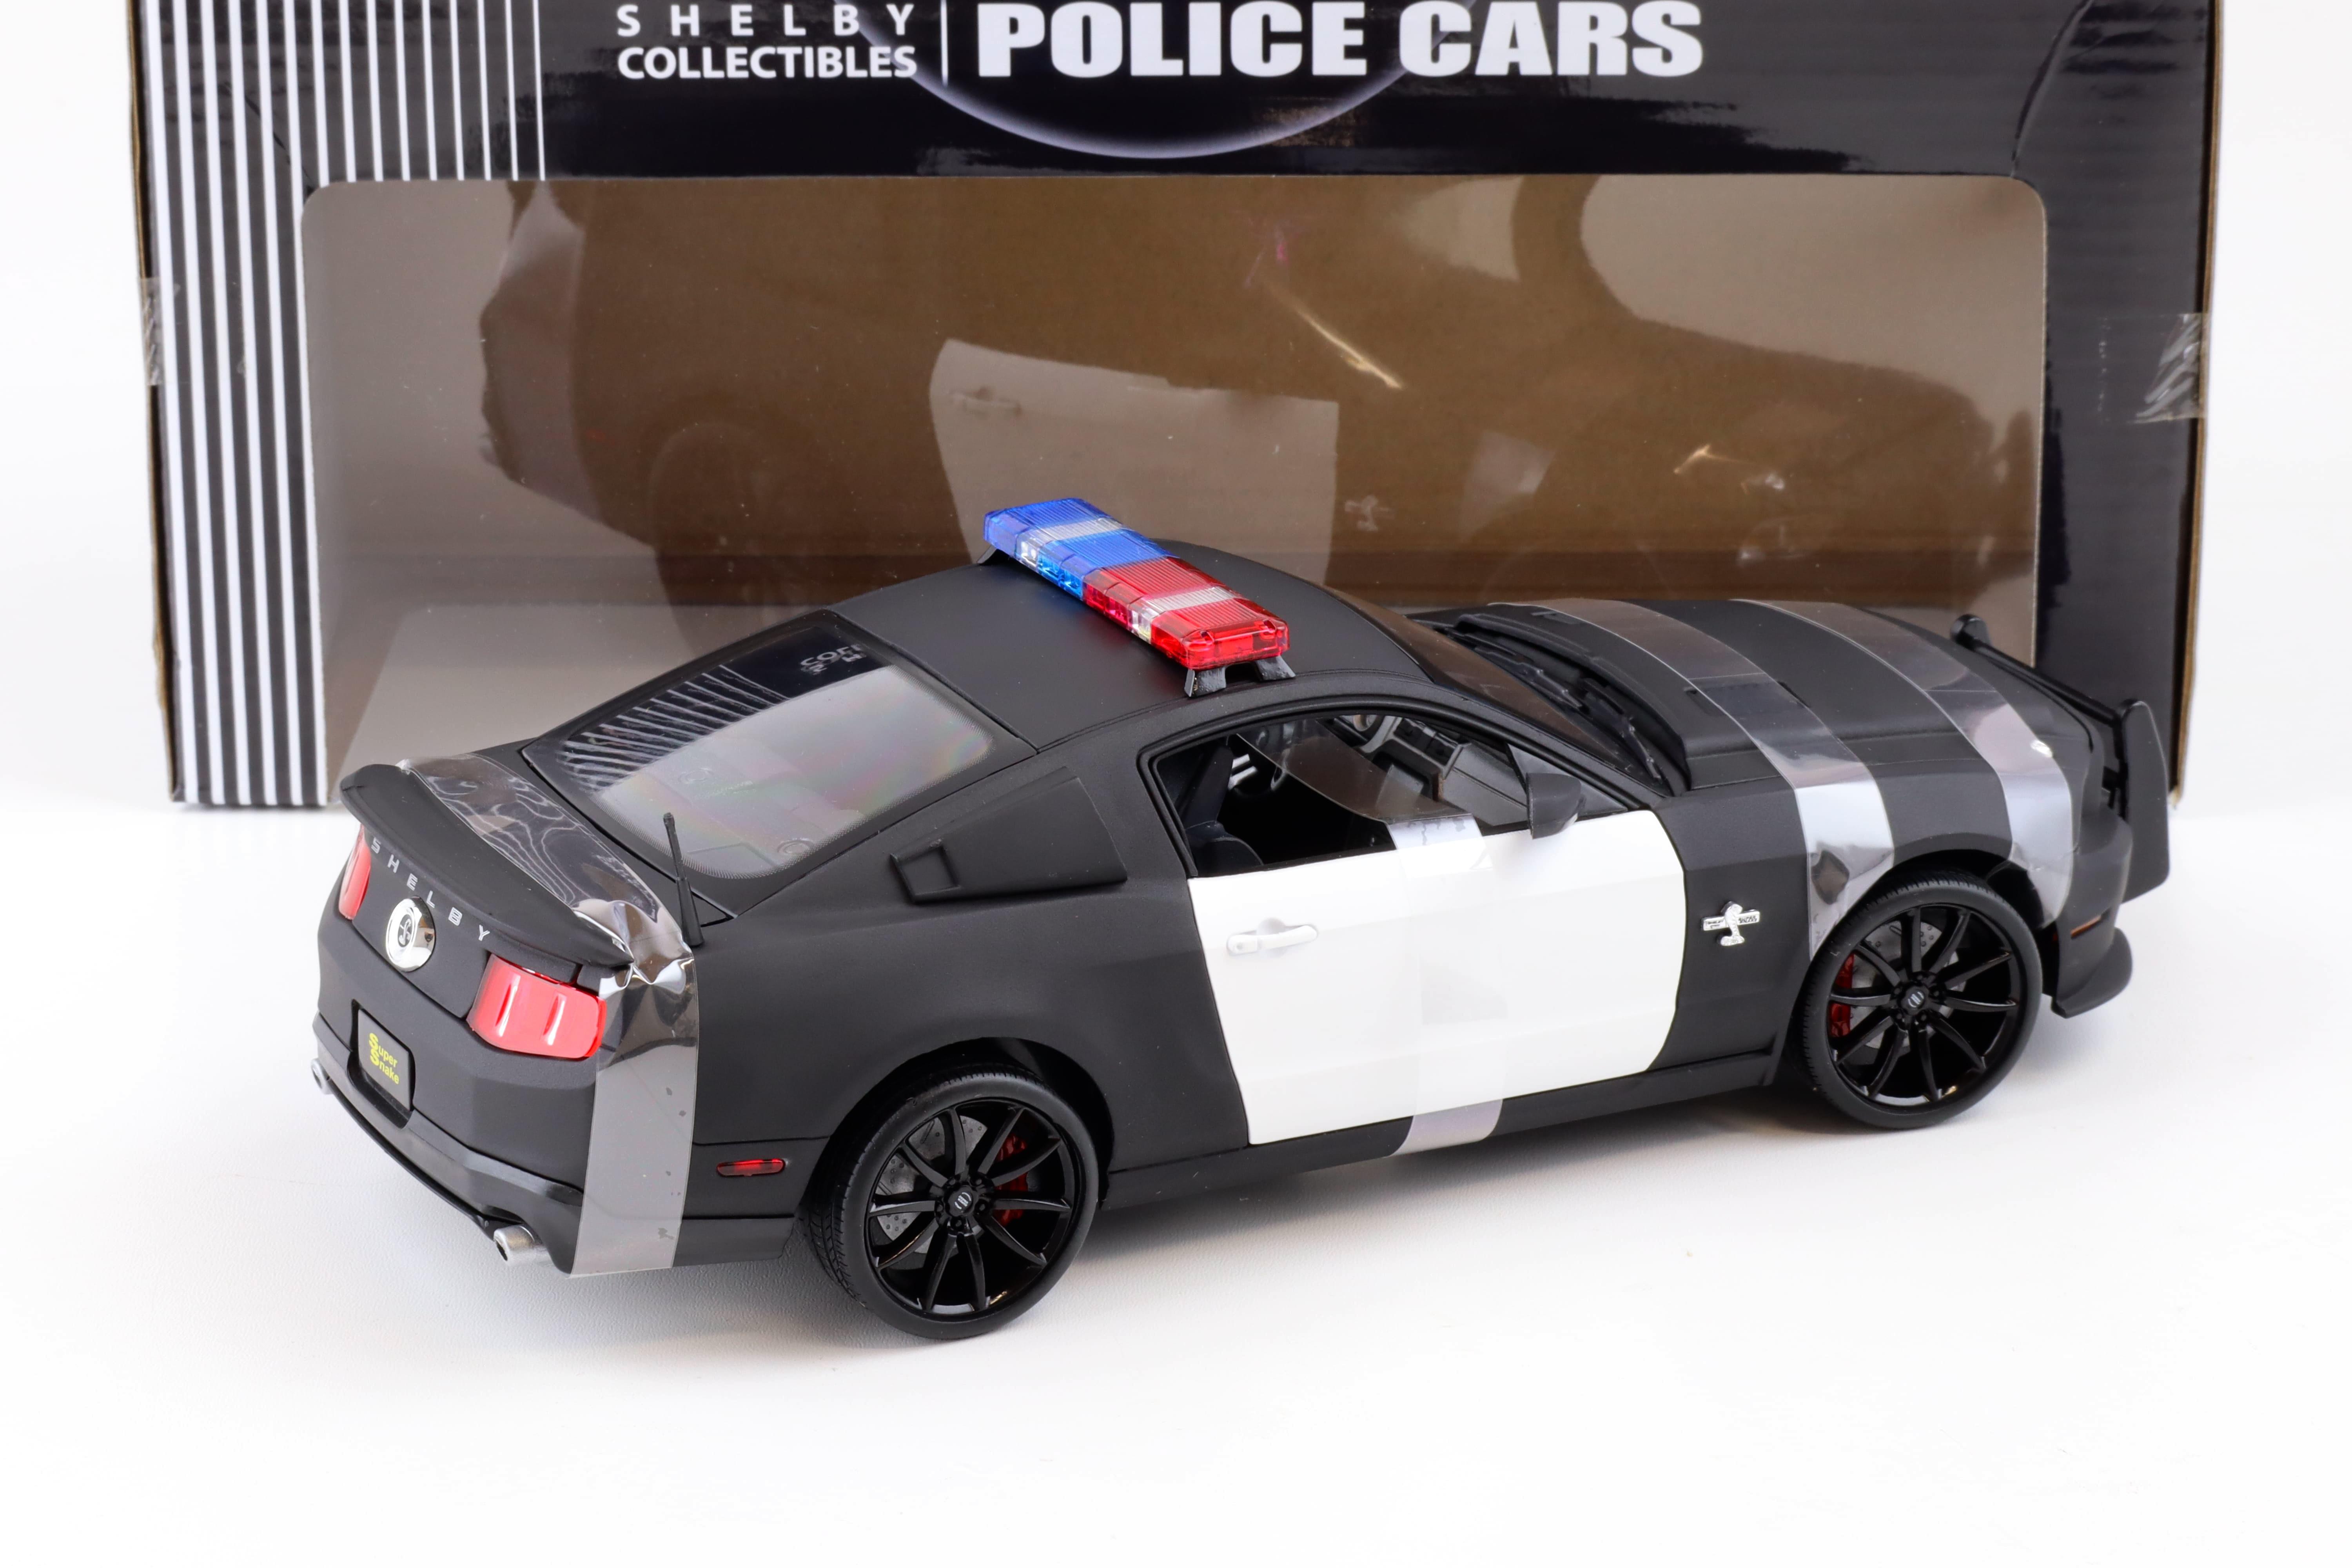 1:18 Shelby Collectibles 2012 Ford Shelby GT500 Super Snake Police black/ white